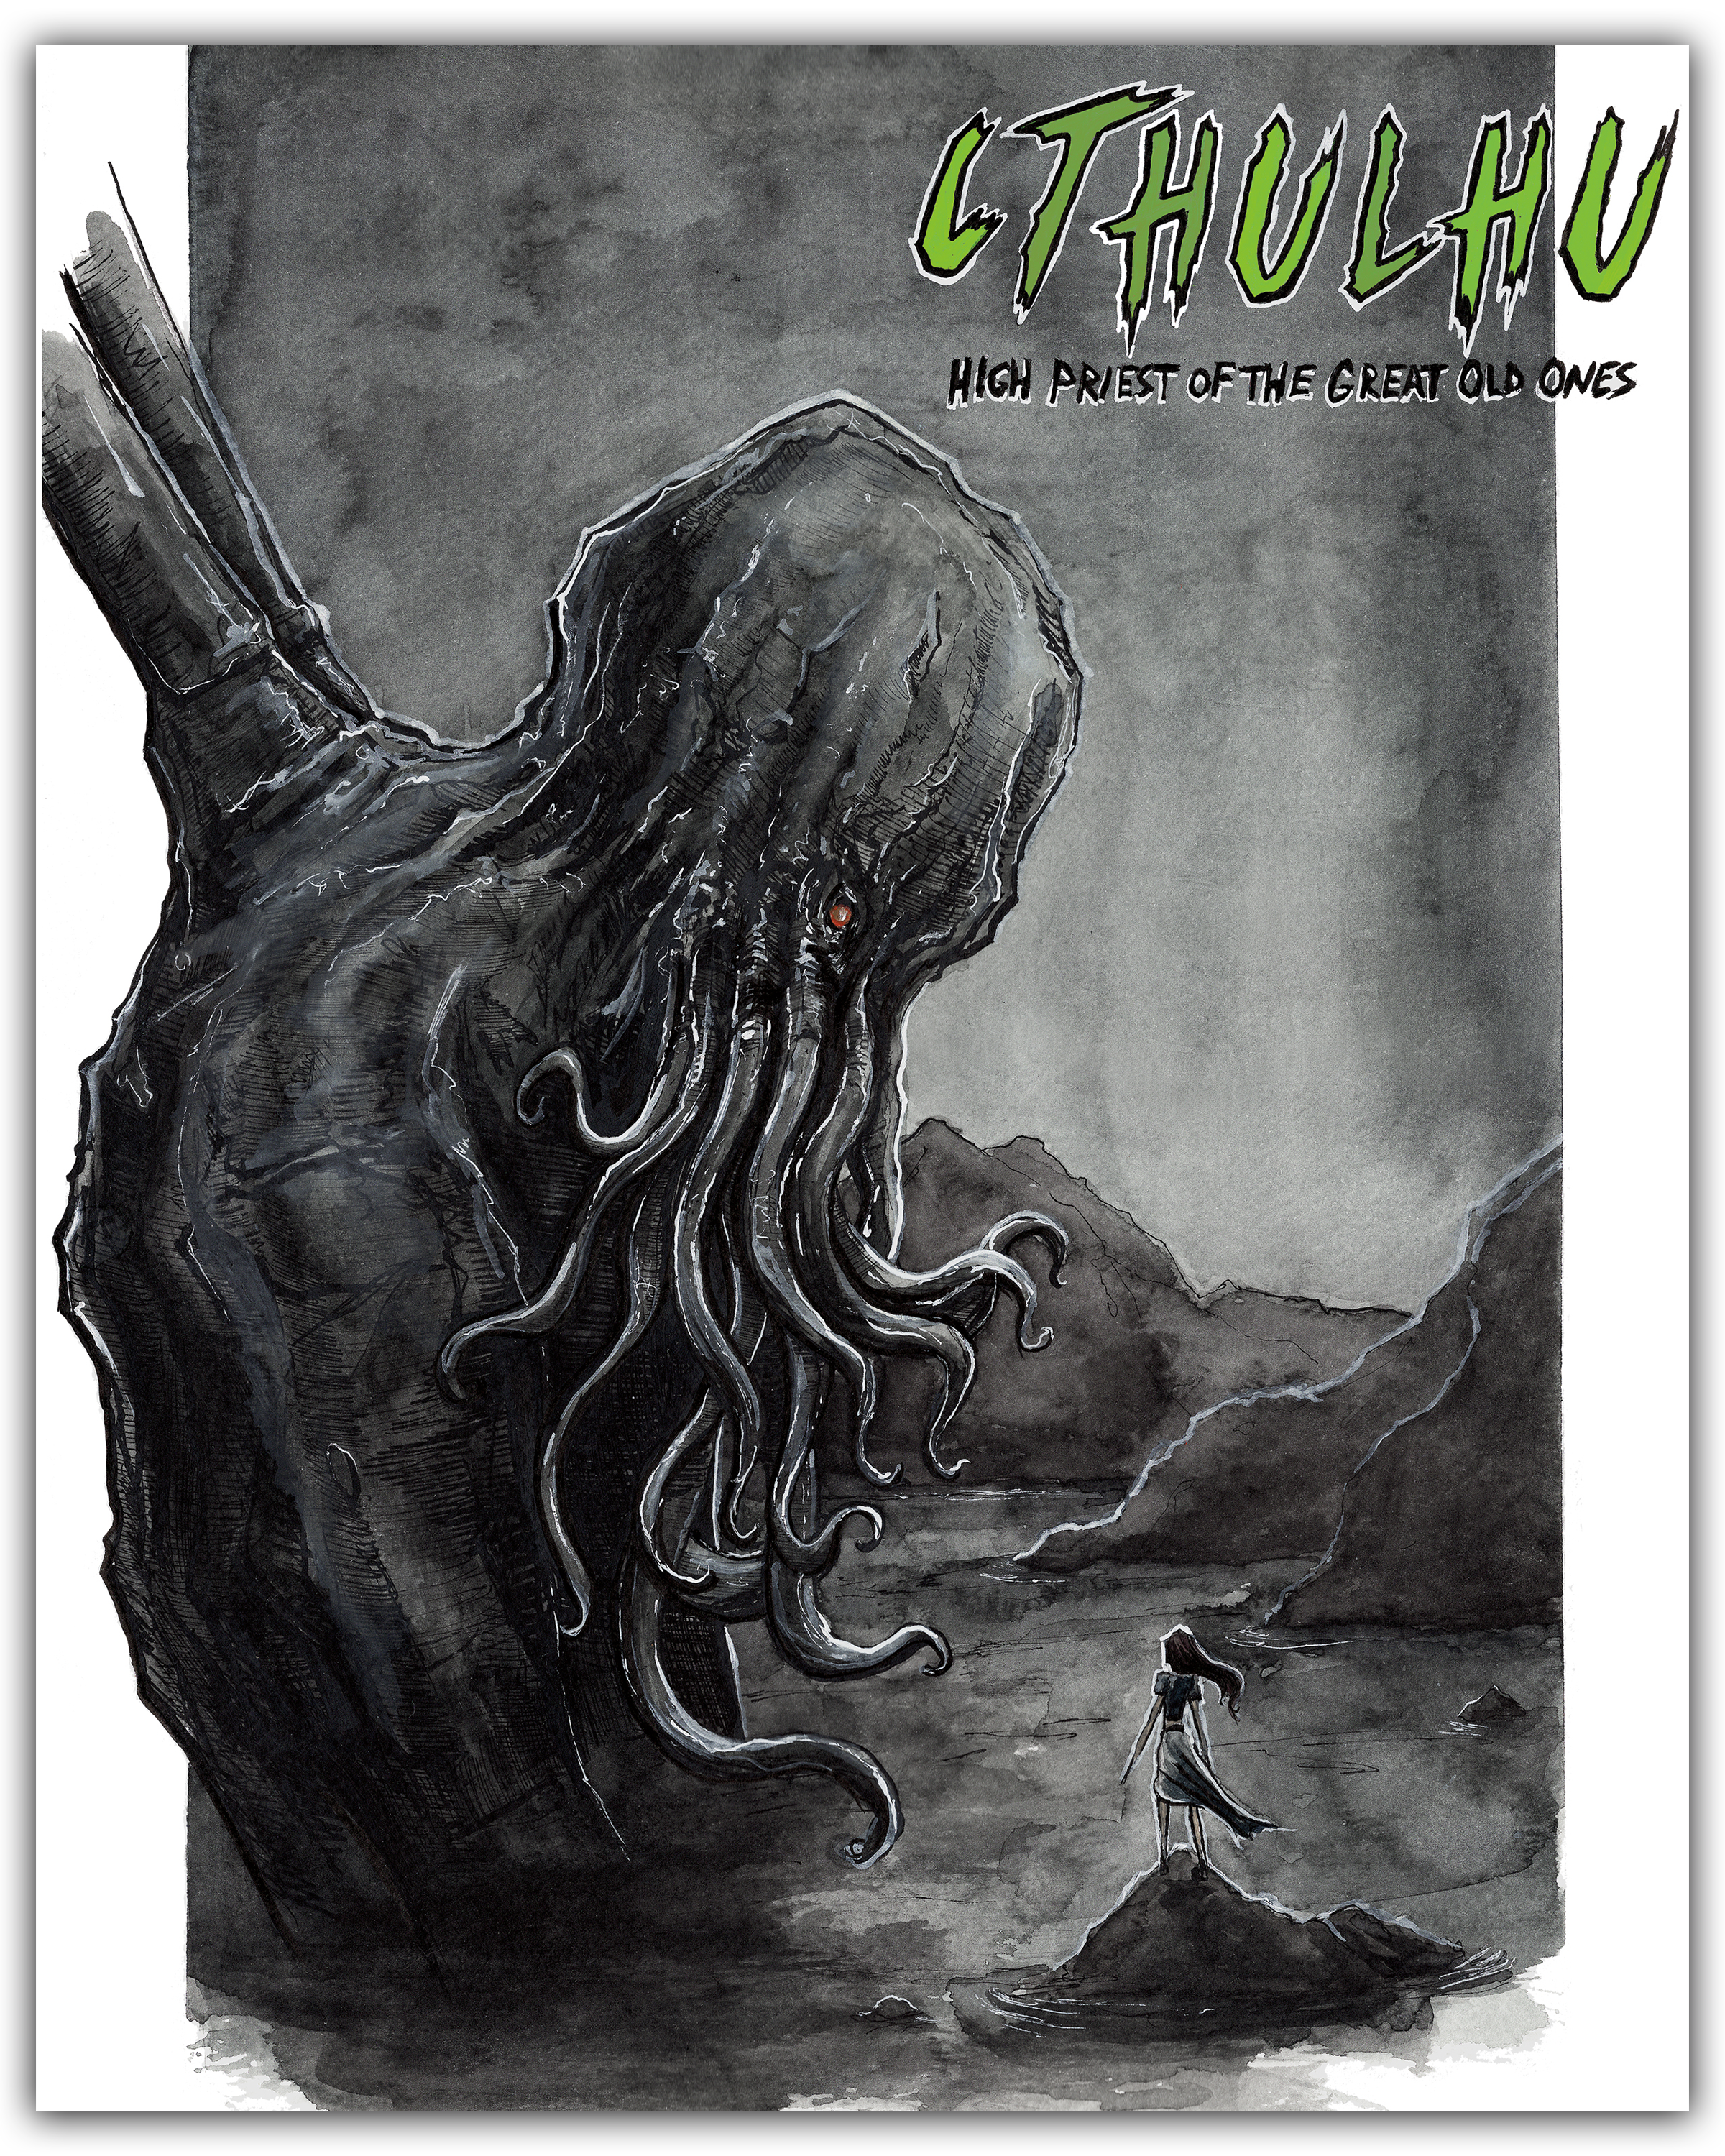 Cthulhu: High Priest of the Great Old Ones